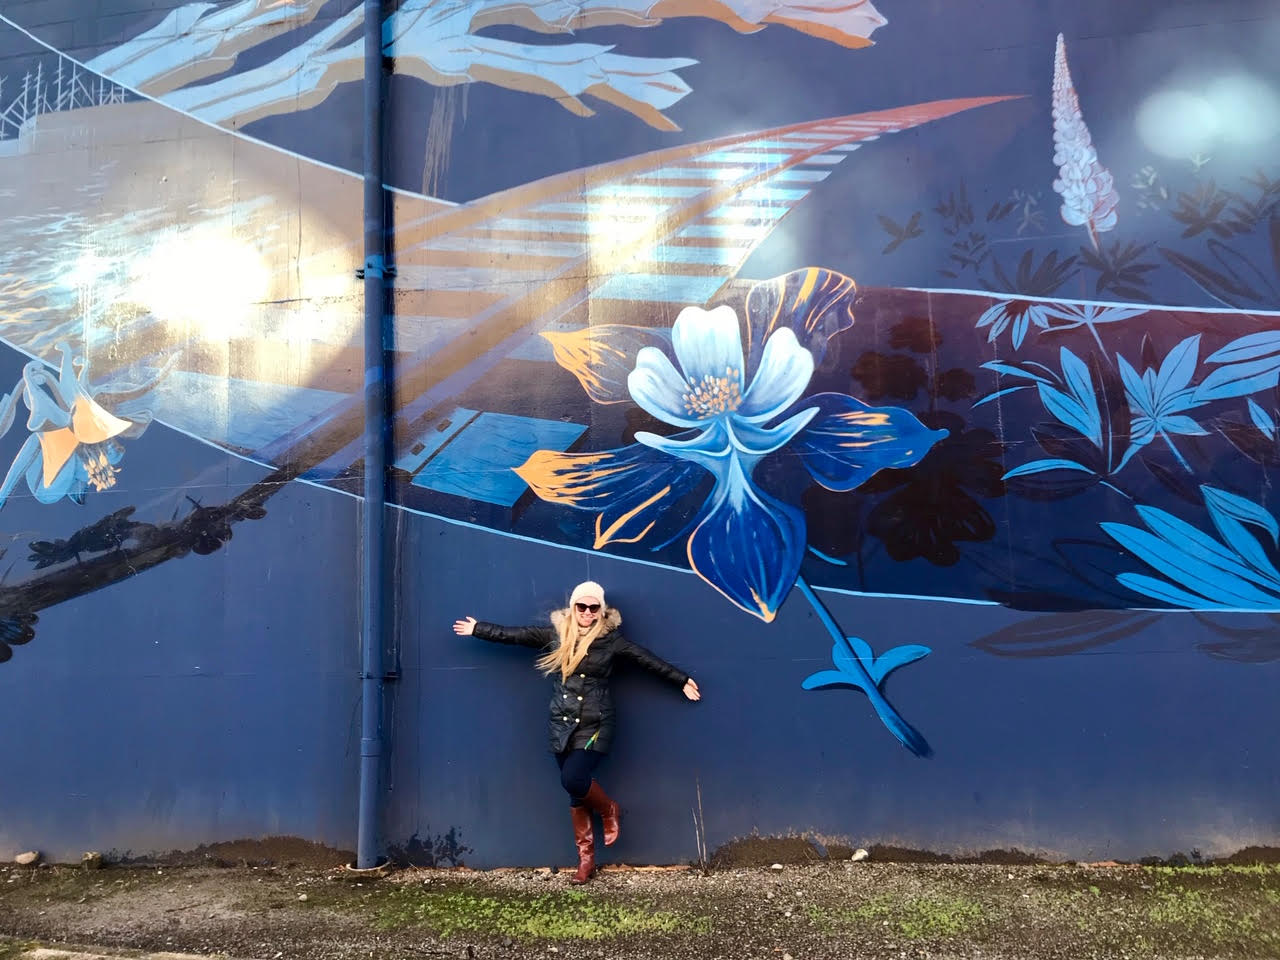 Anna Osgoodby Life + Biz: A Tacoma Annual Tradition Hunting for Monkeyshines: A Look at the Citywide Guerrilla Art Hunt